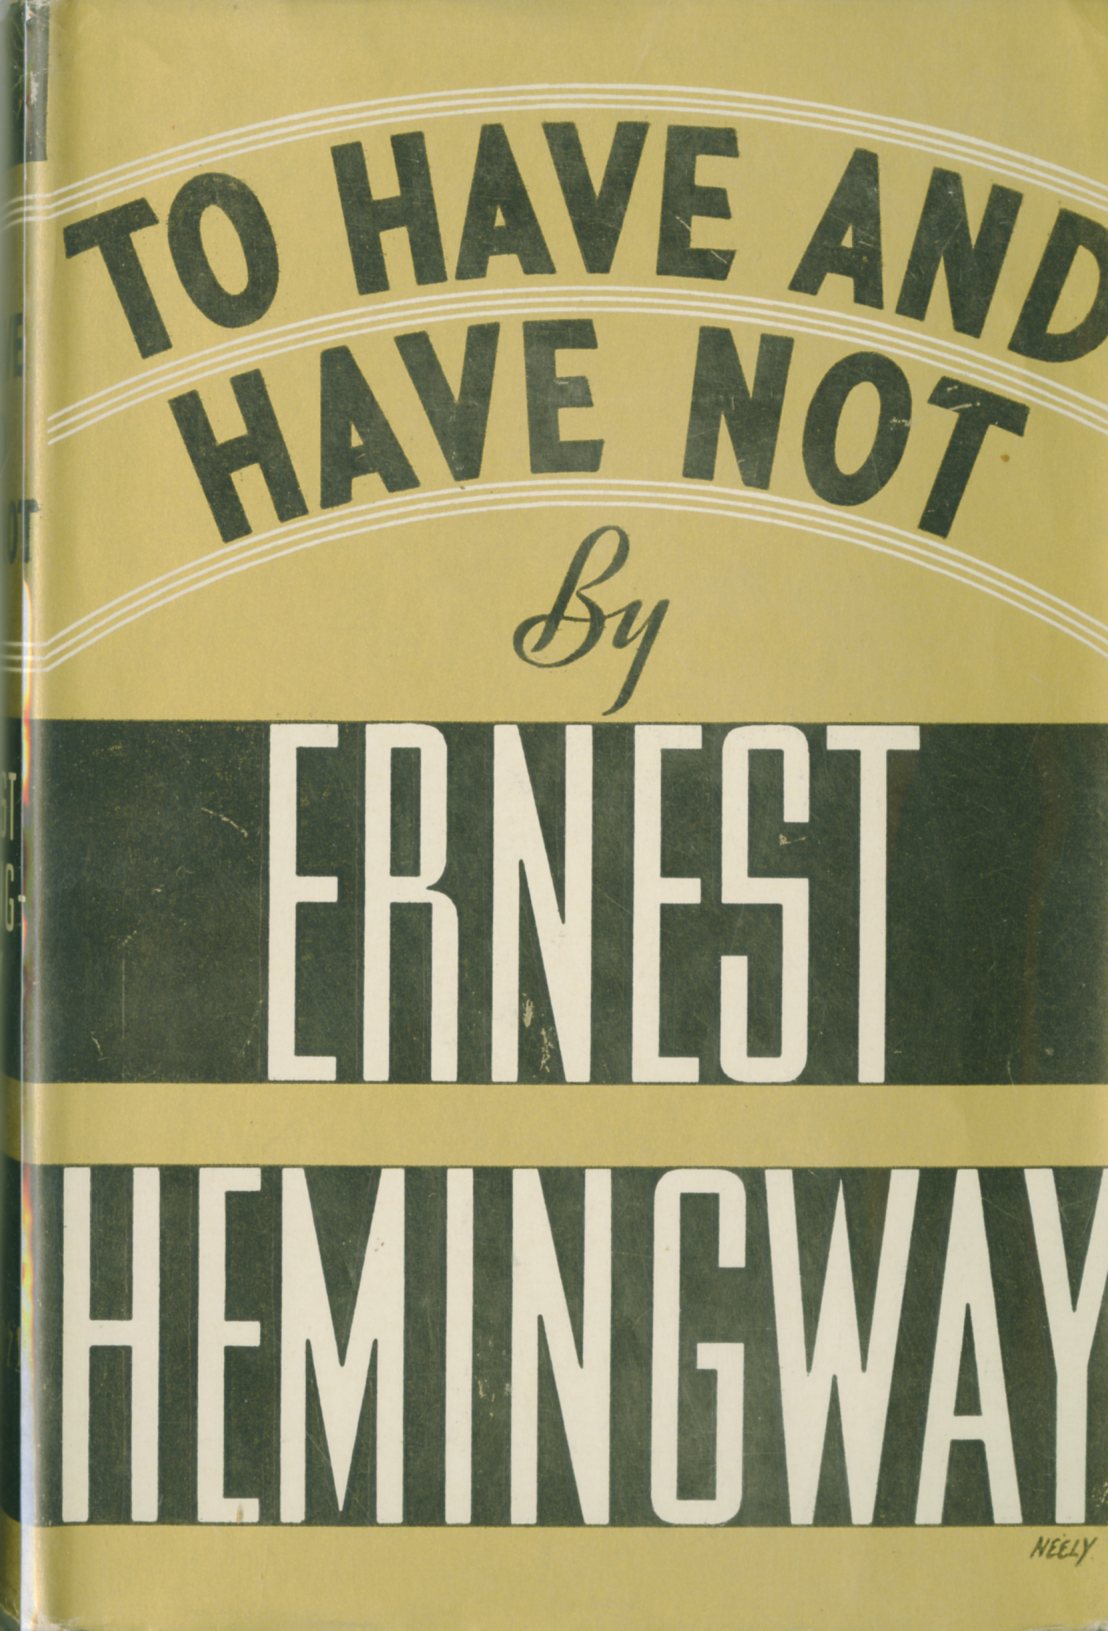 Hemingway (Ernest) To Have and Have Not, N.Y. (Scribner 1937) First Edn., with Scribner code "A".